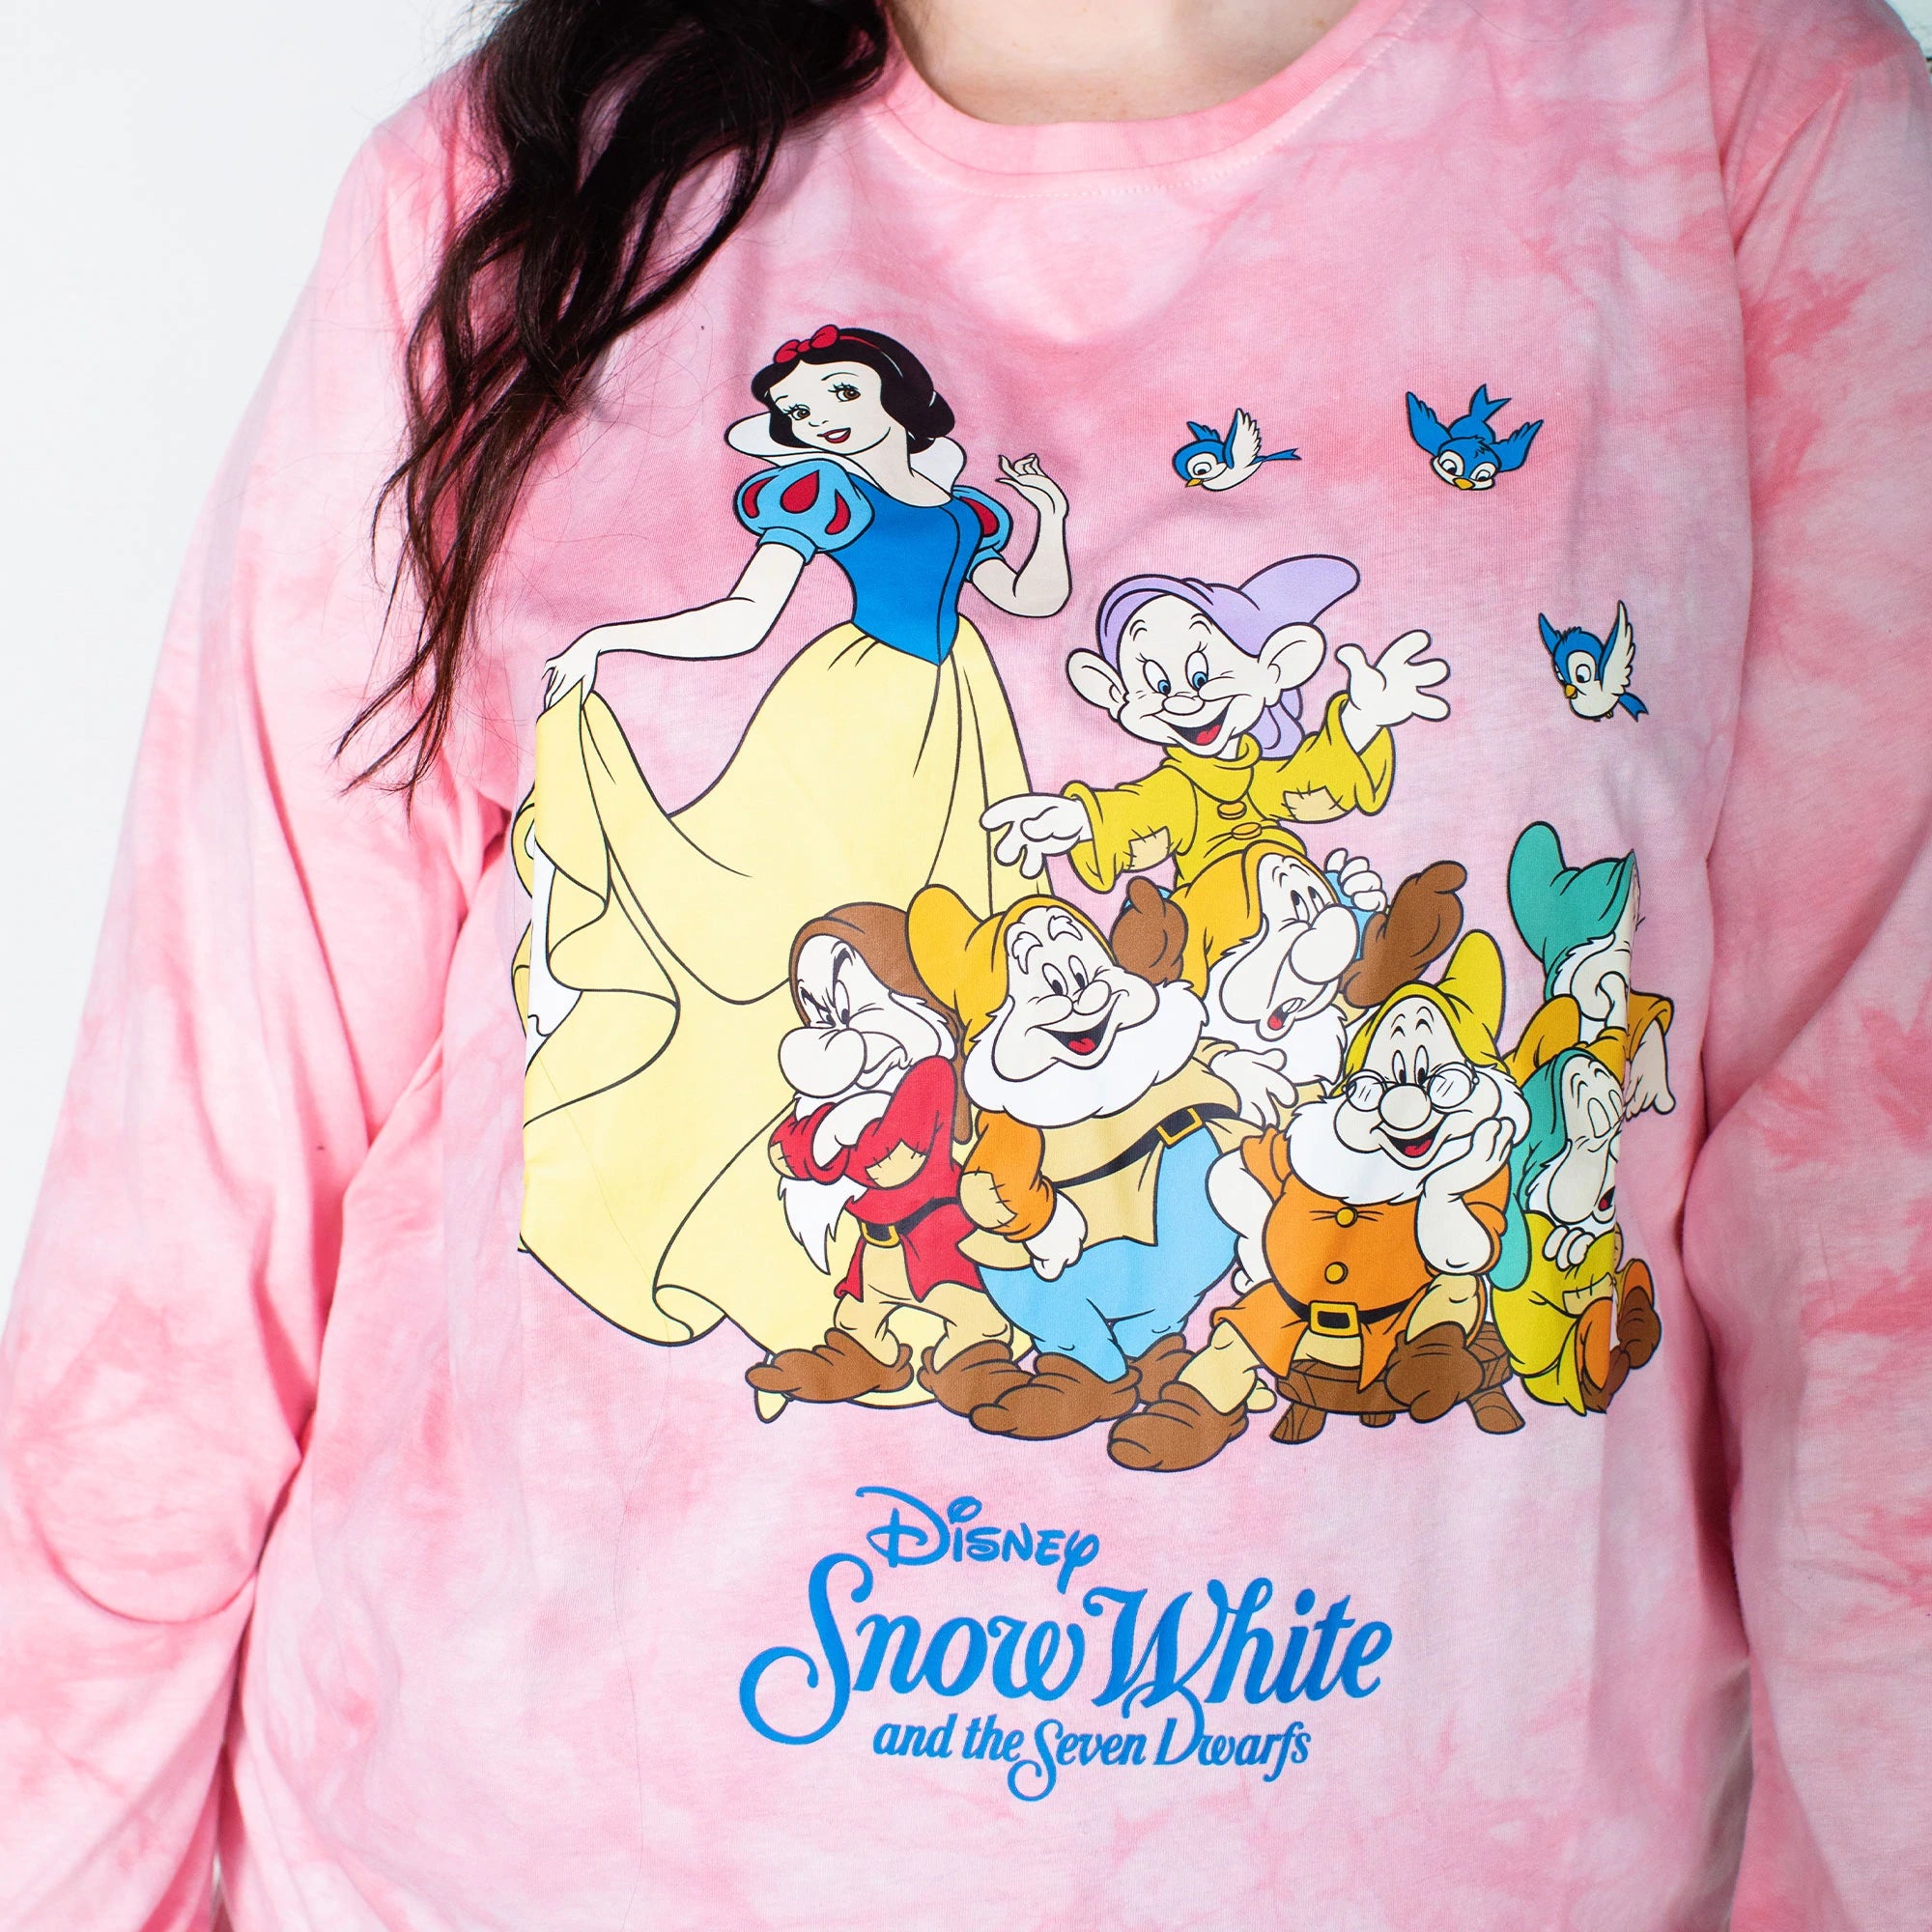 Snow White and the Seven Dwarves Tie Dye Long Sleeve T-Shirt - Cakeworthy